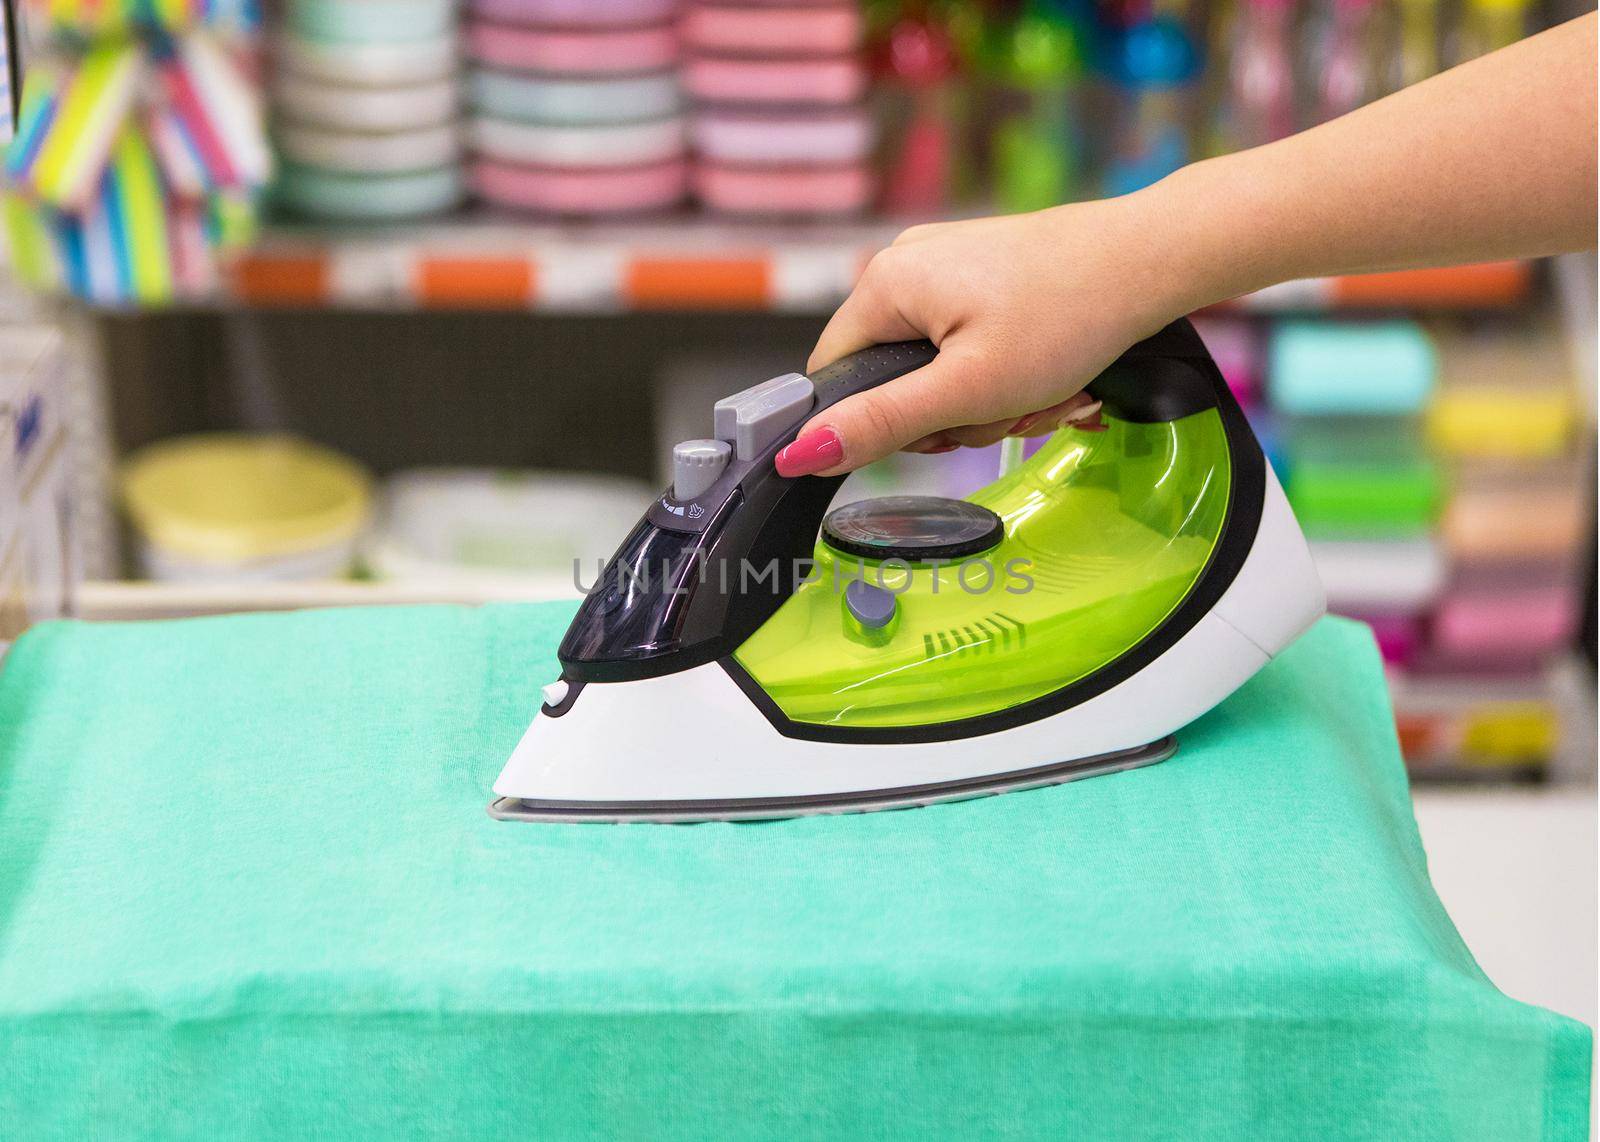 Woman ironing close up at the store